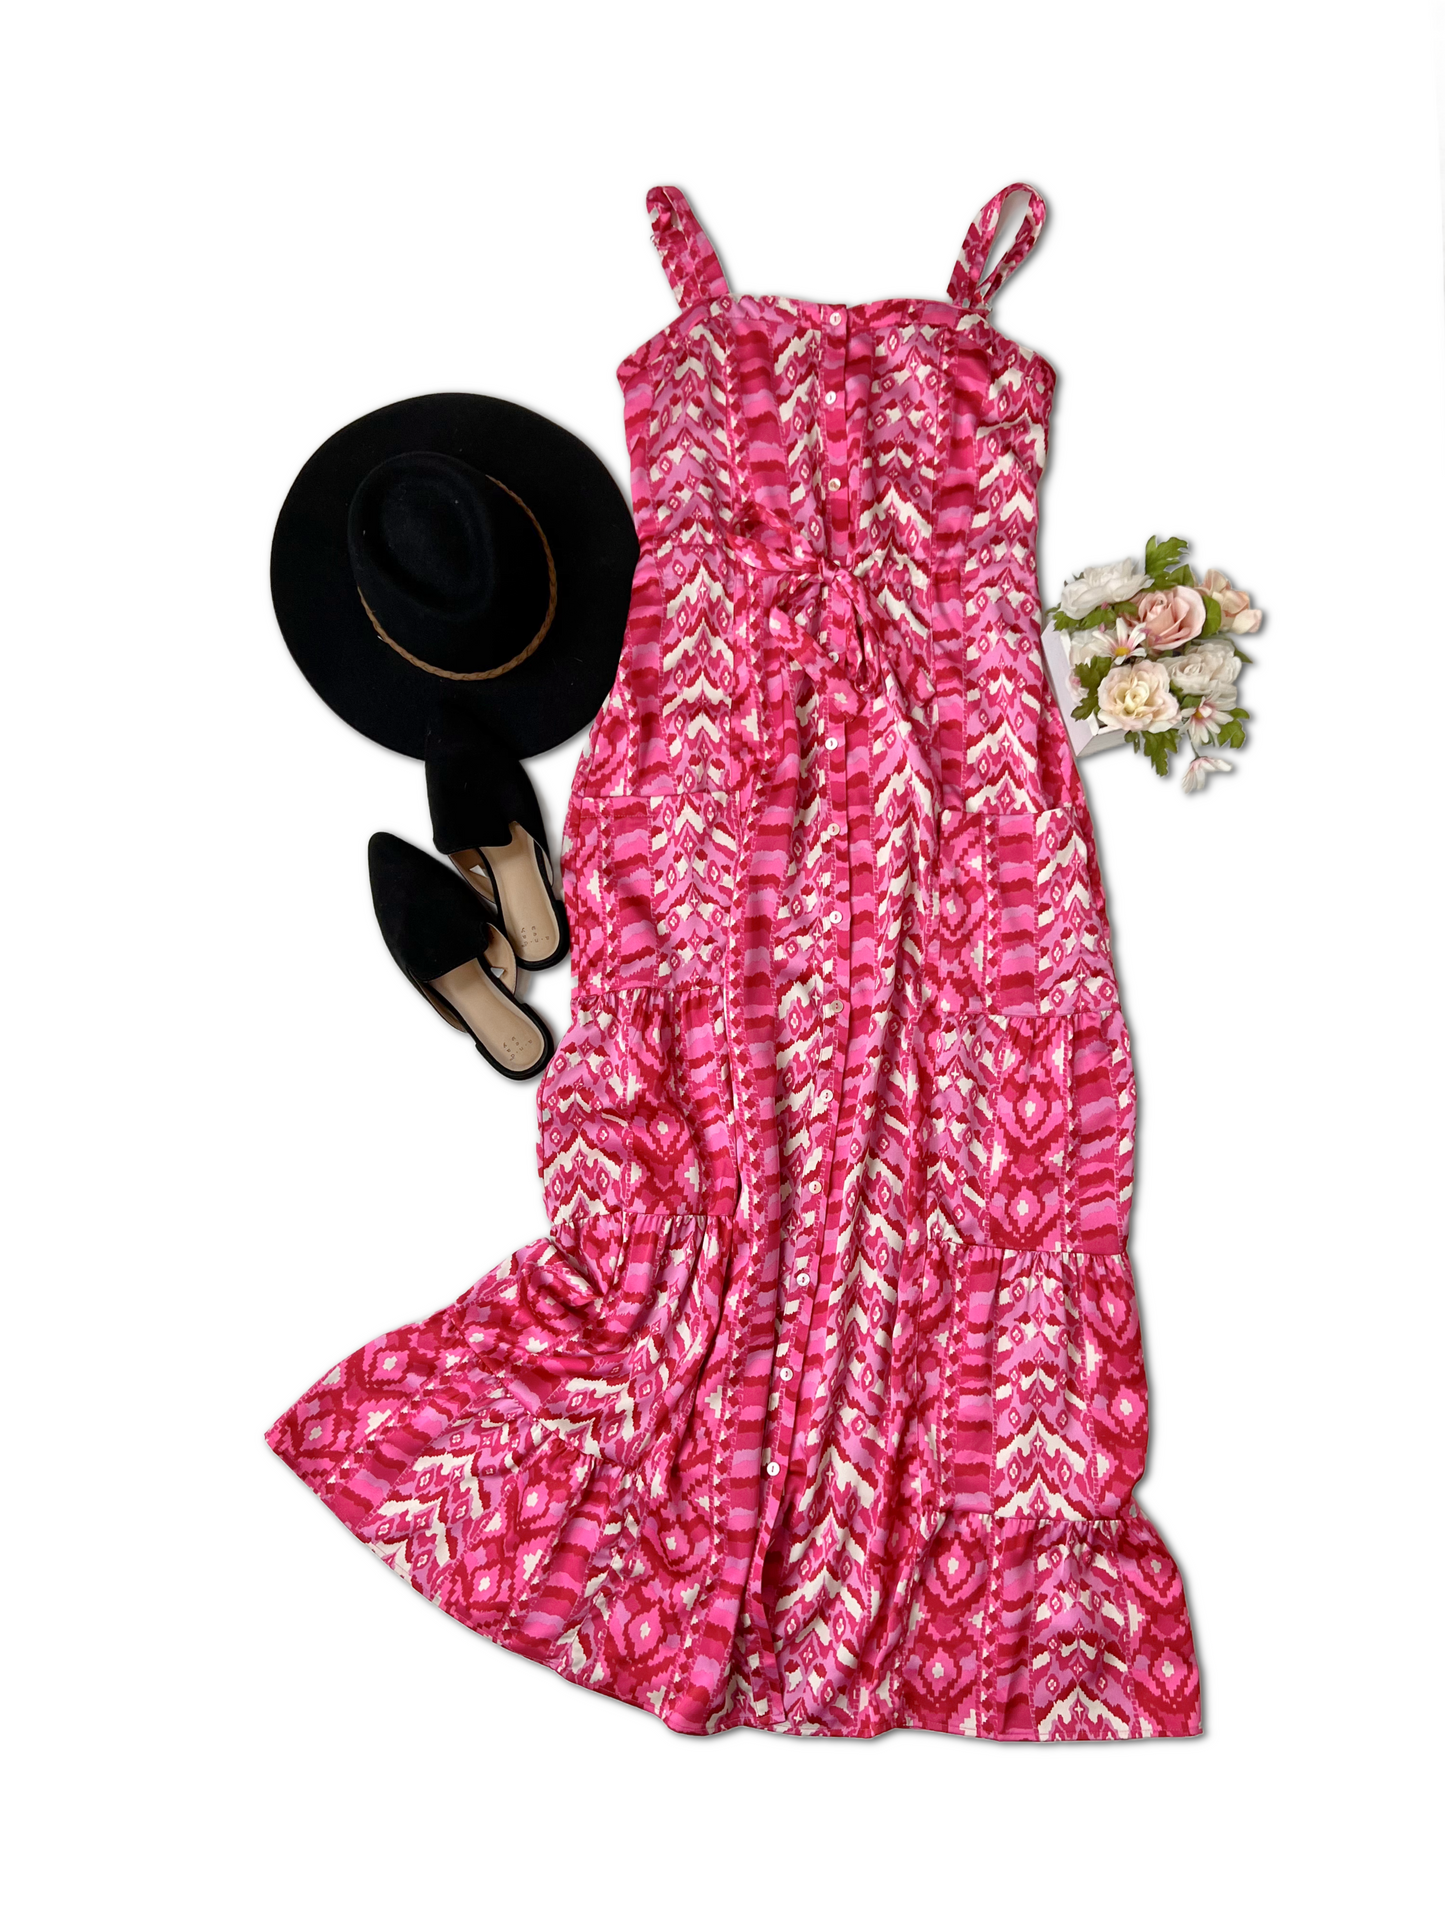 *Preorder* Abby Road - Hot Pink Maxi Dress